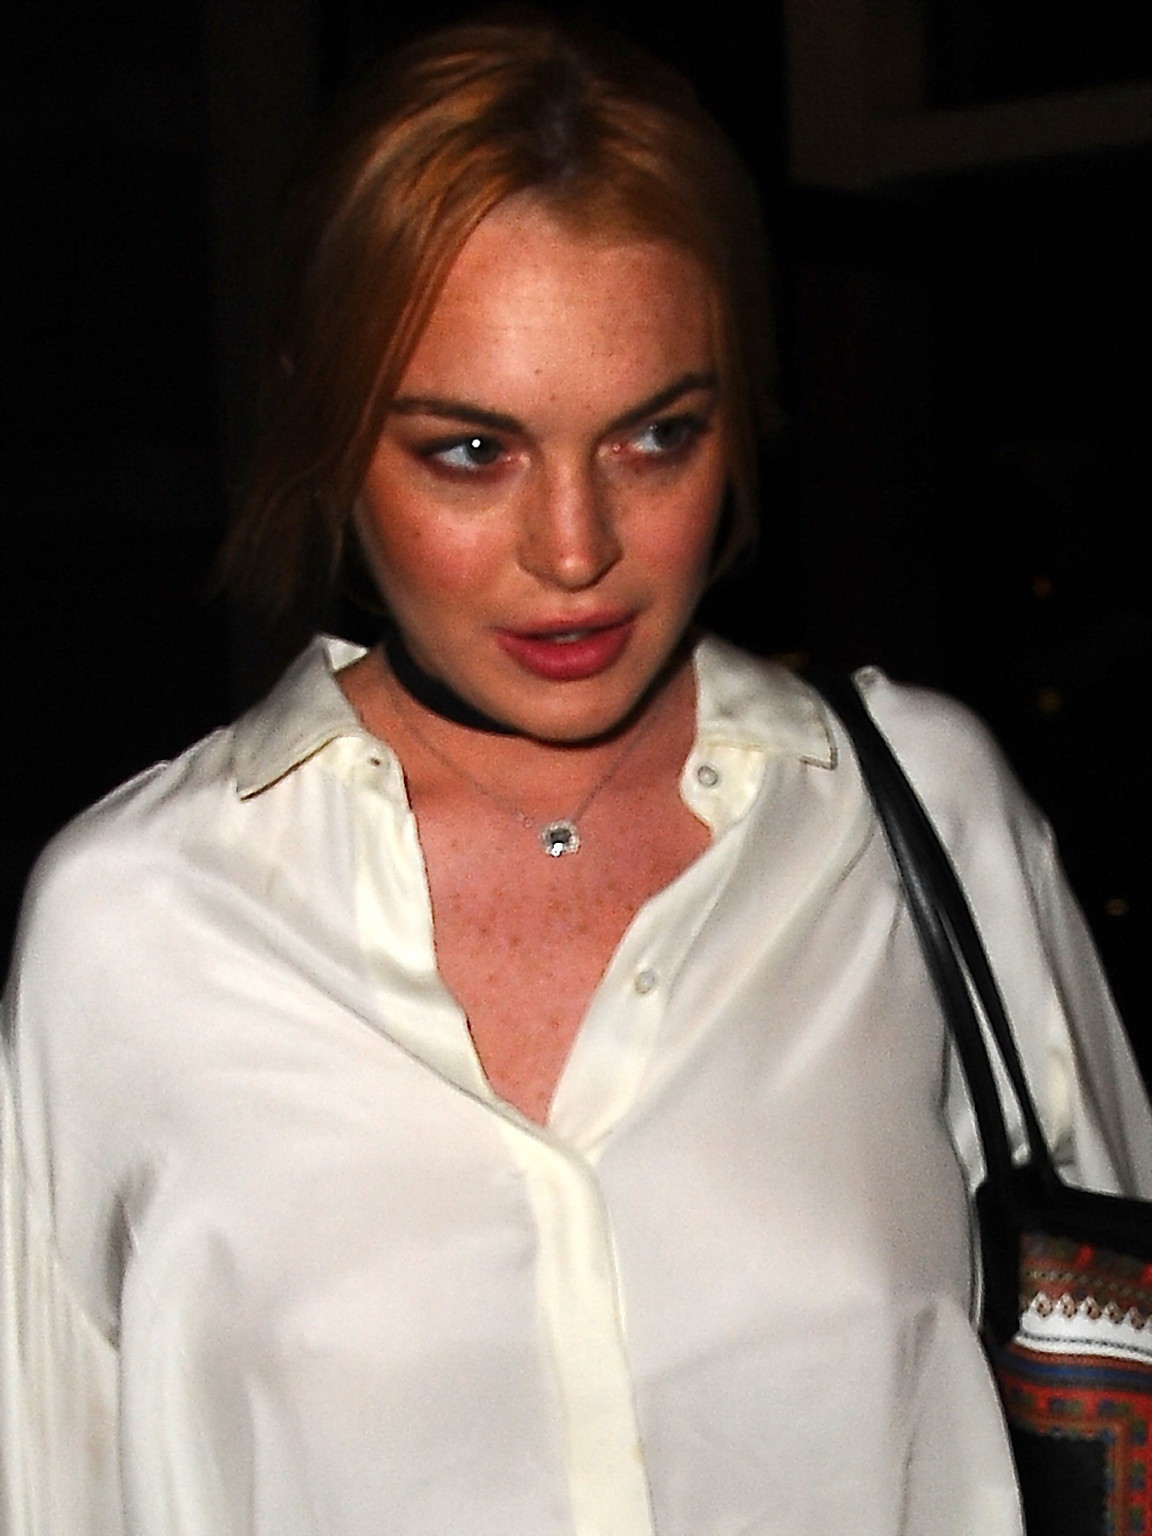 Lindsay Lohan braless wearing a white shirt out in NYC #75220890